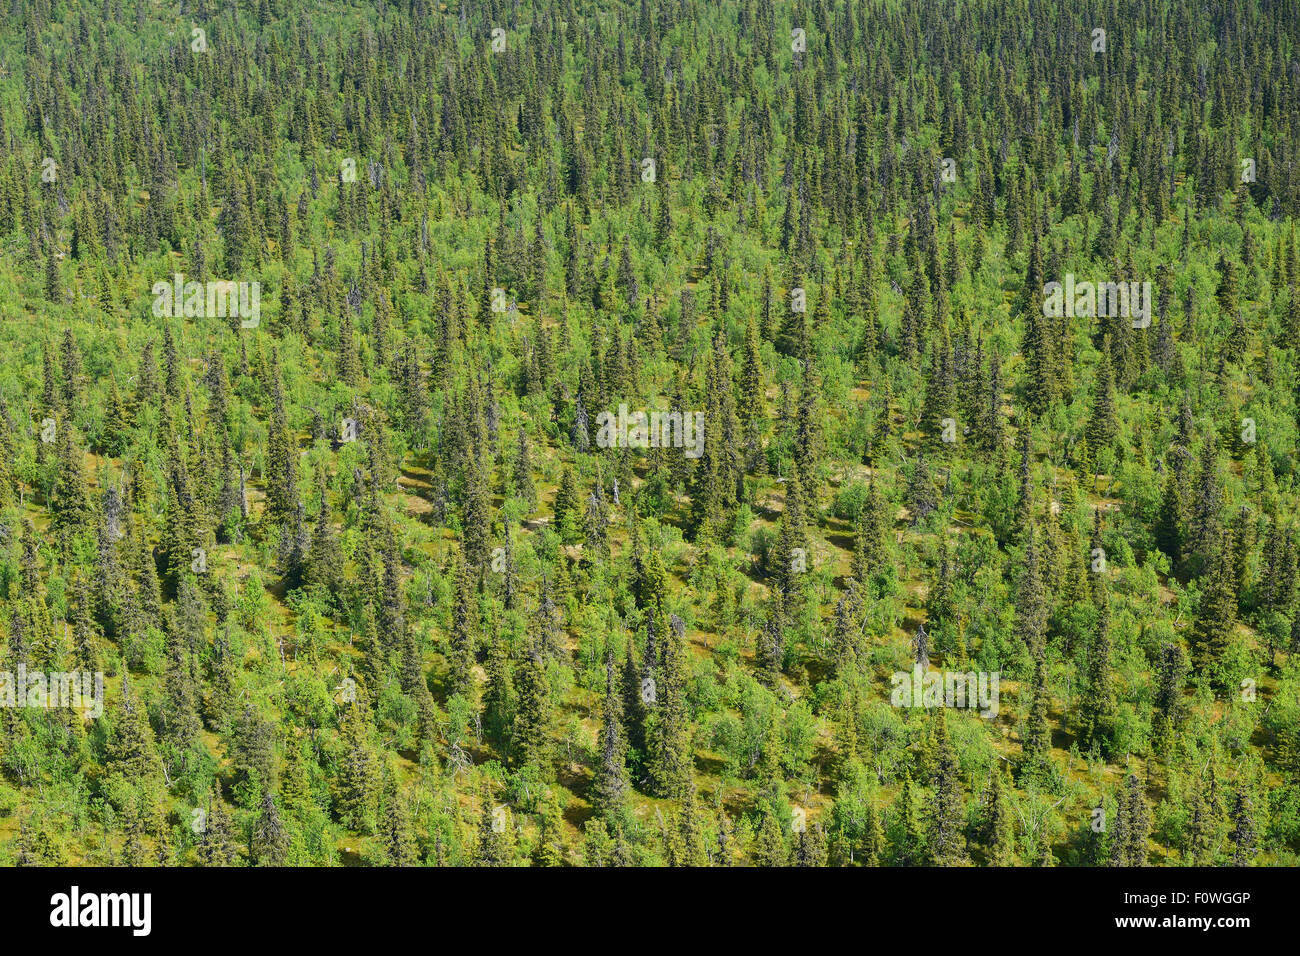 Aerial view of taiga boreal forest, Sjaunja Bird Protection Area, Greater Laponia Rewilding Area, Lapland, Norrbotten, Sweden, June 2013. Stock Photo